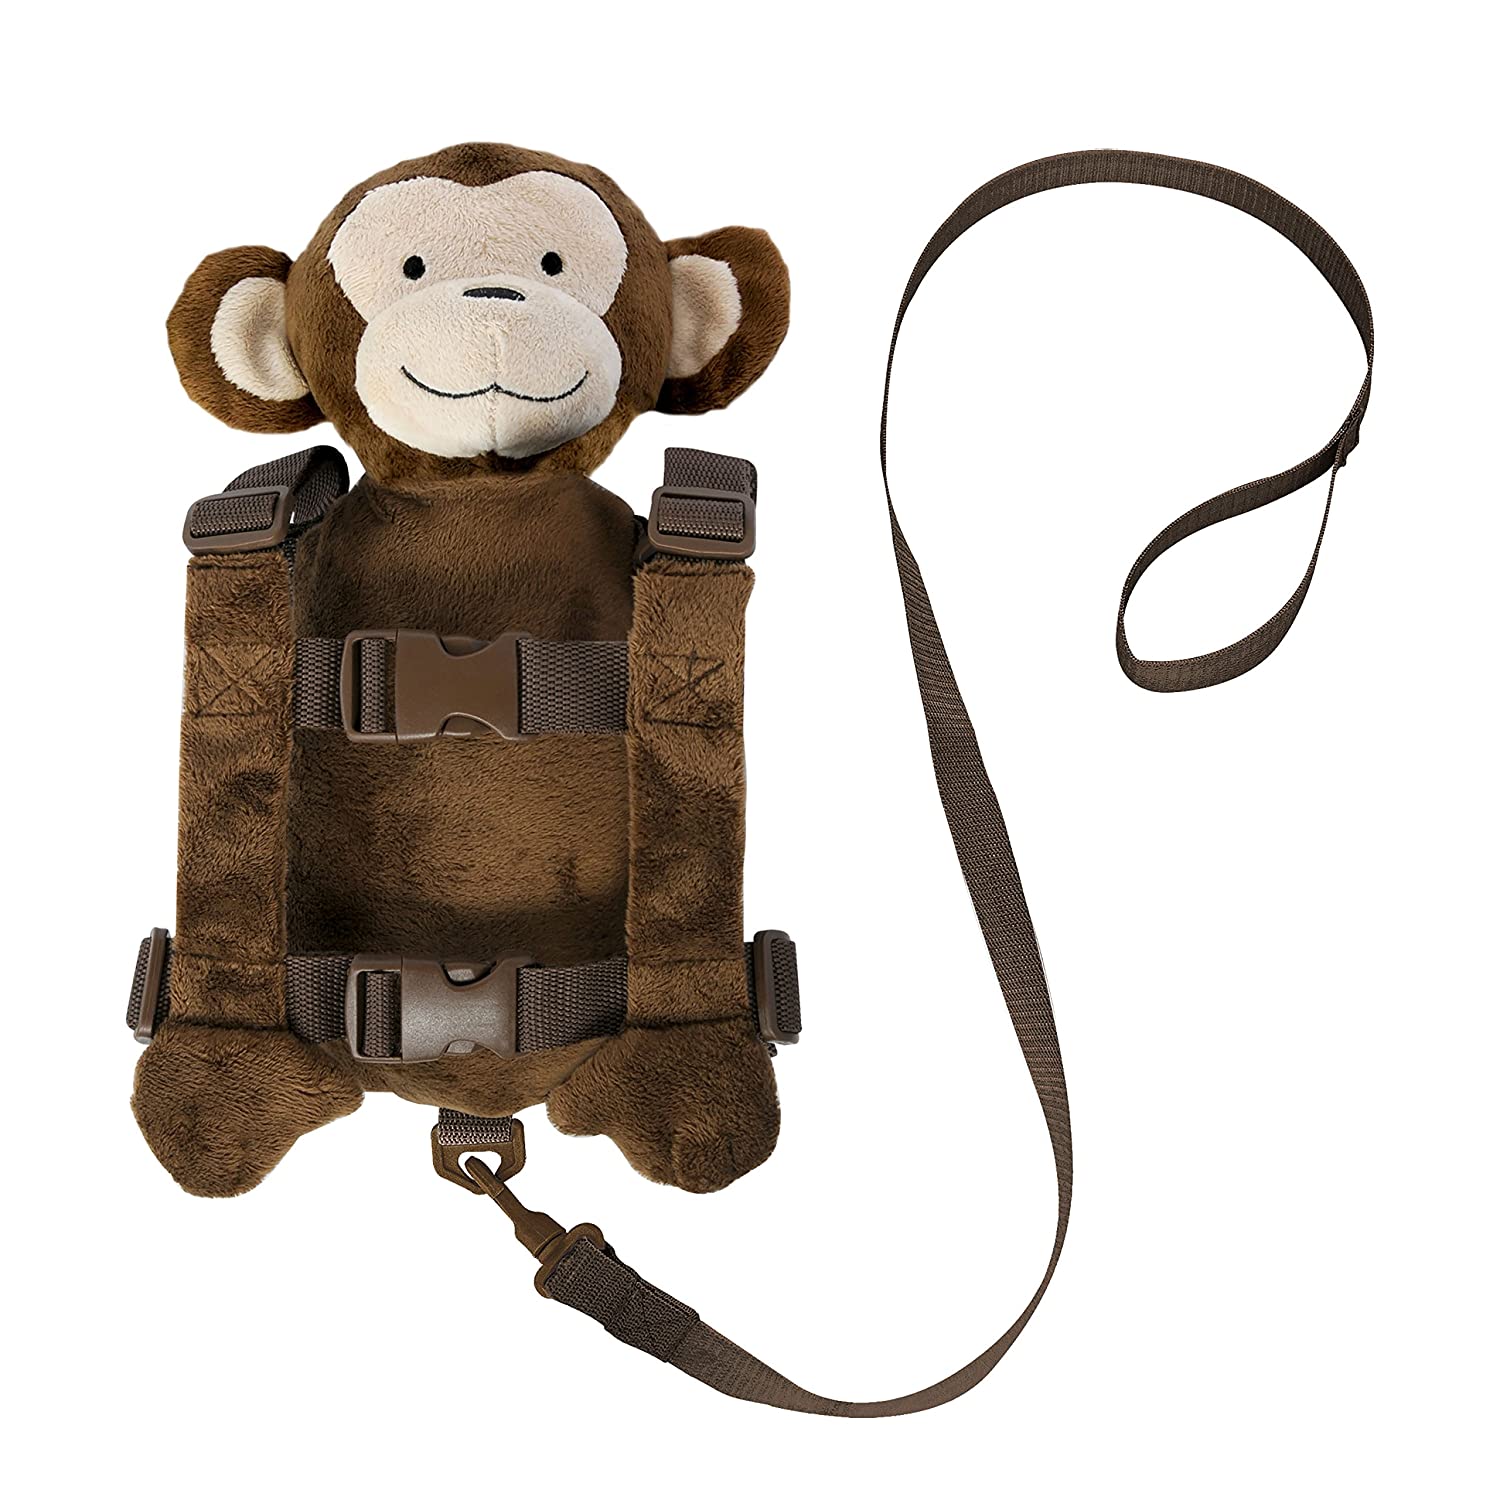 Top 7 Best Child Leashes, Backpacks, Straps & Harness Reviews in 2023 1